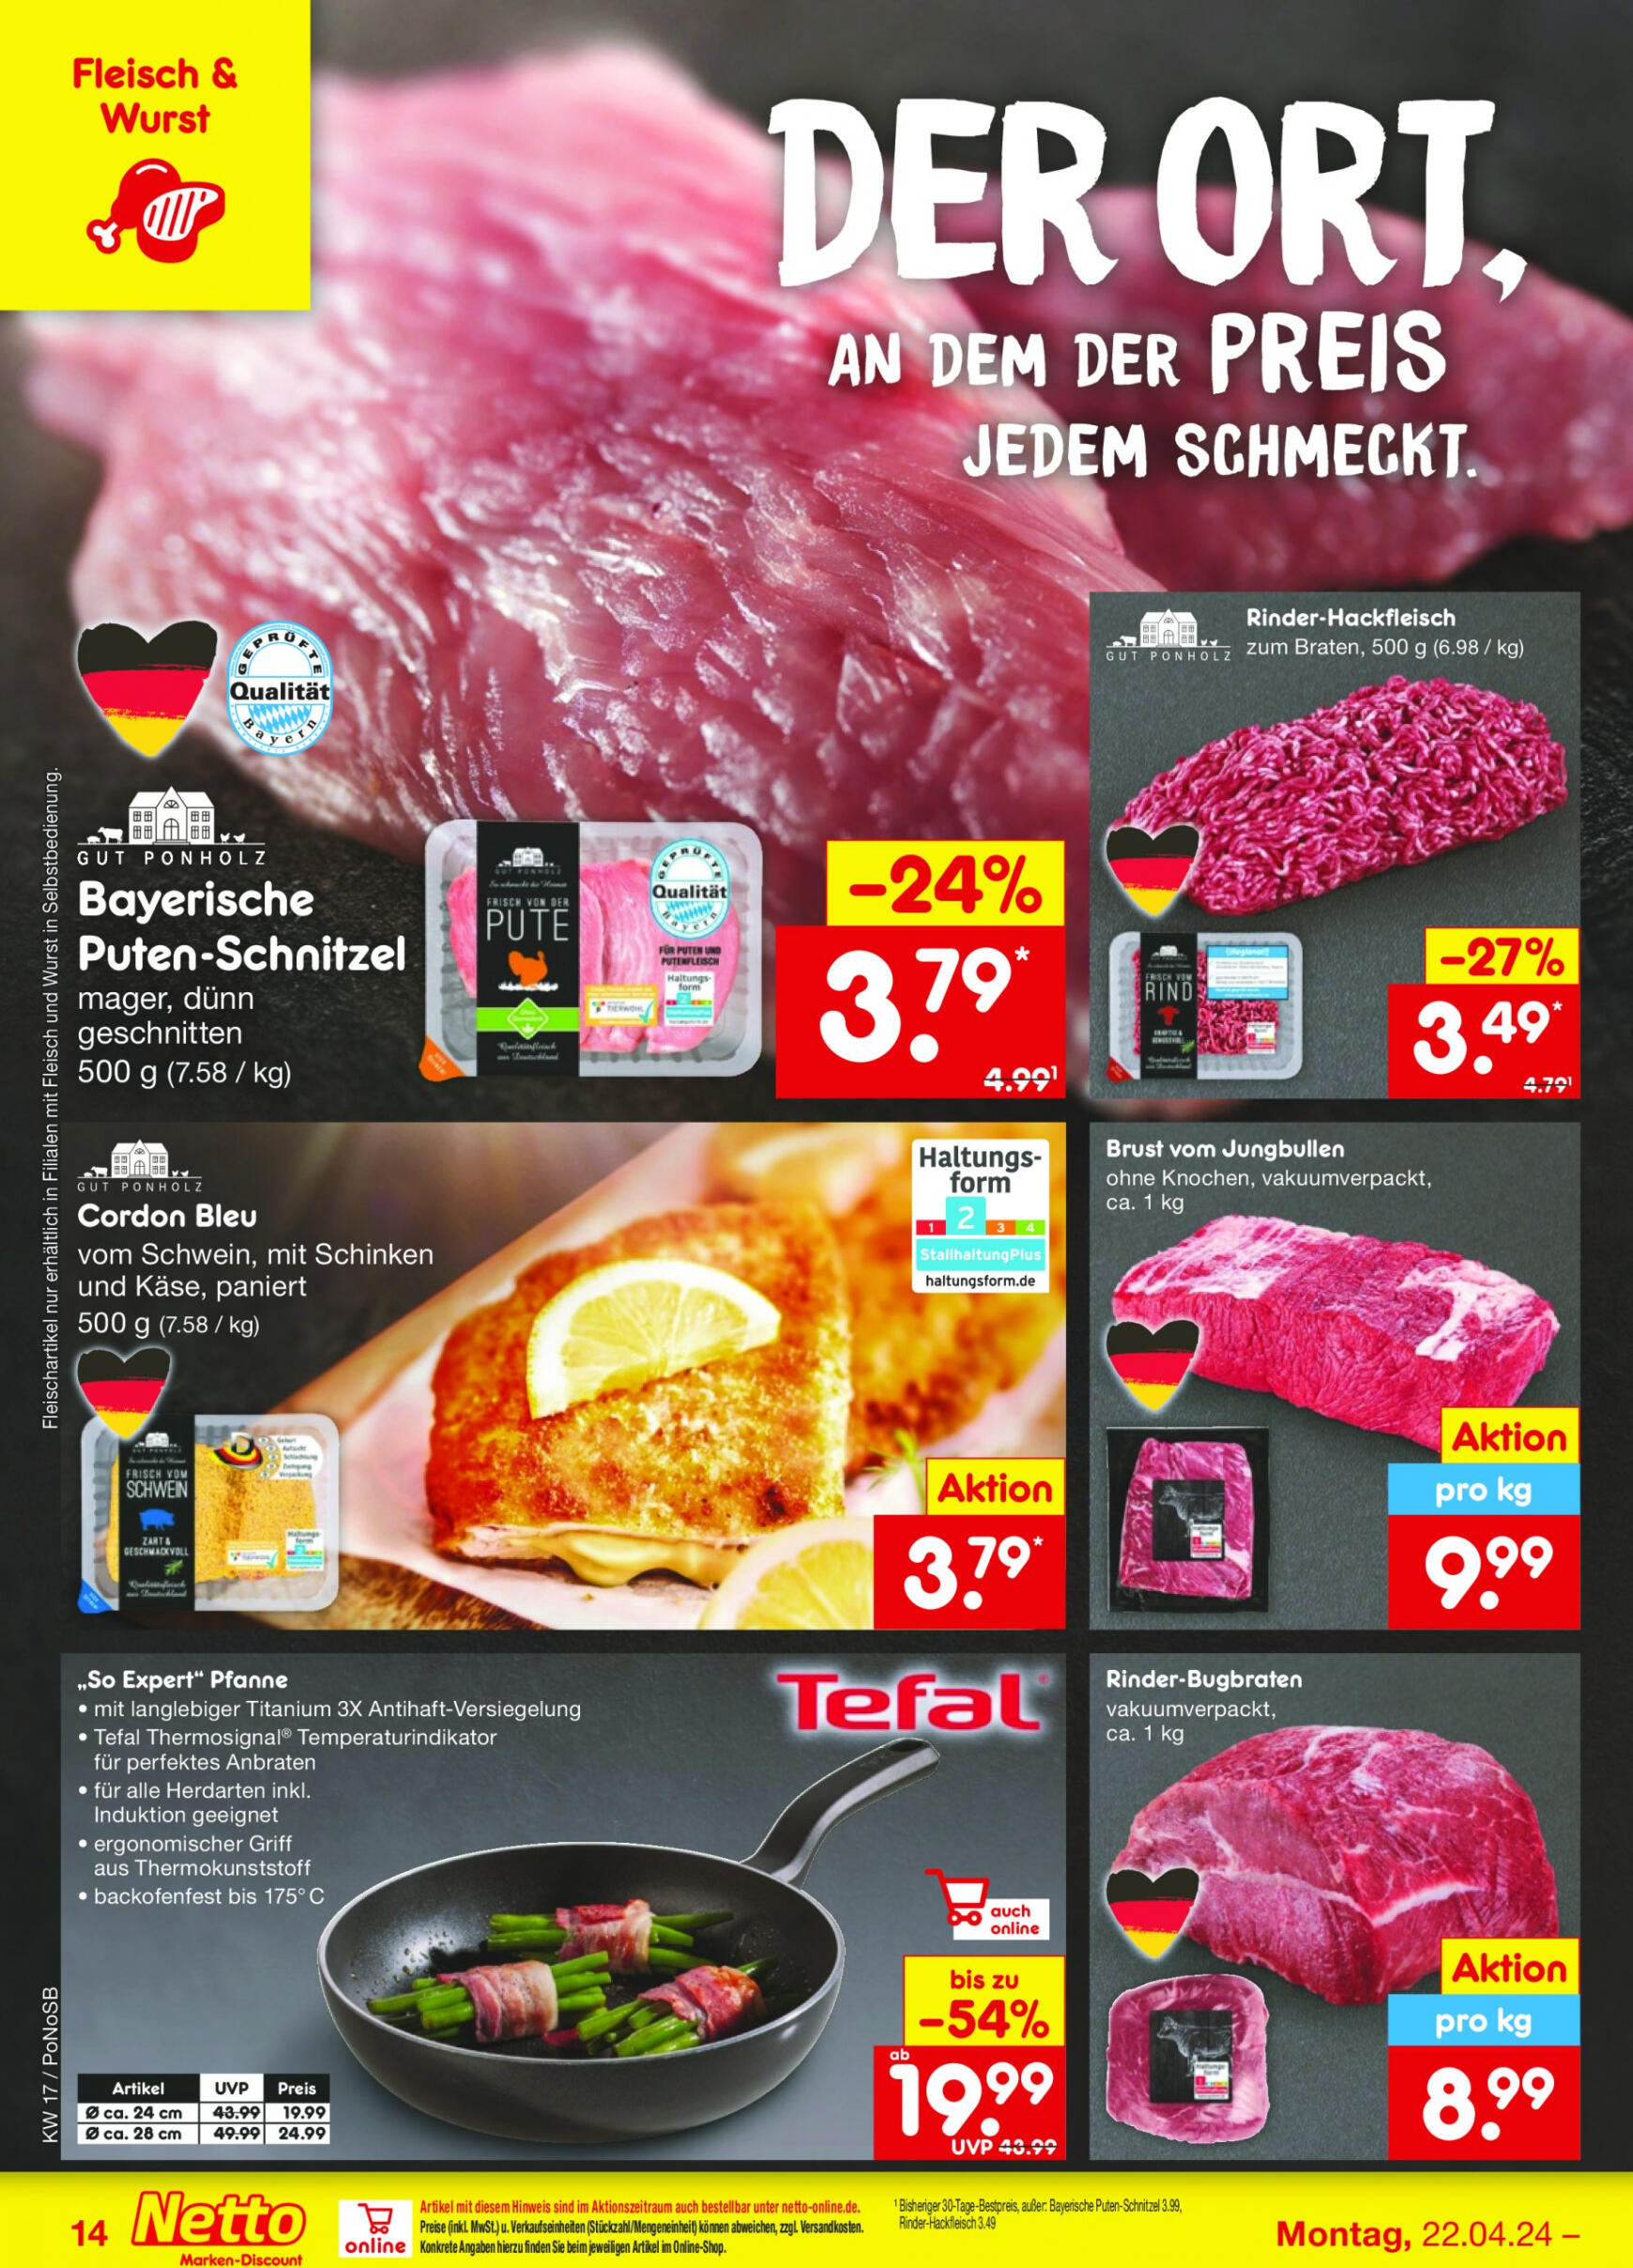 netto - Flyer Netto aktuell 22.04. - 27.04. - page: 16